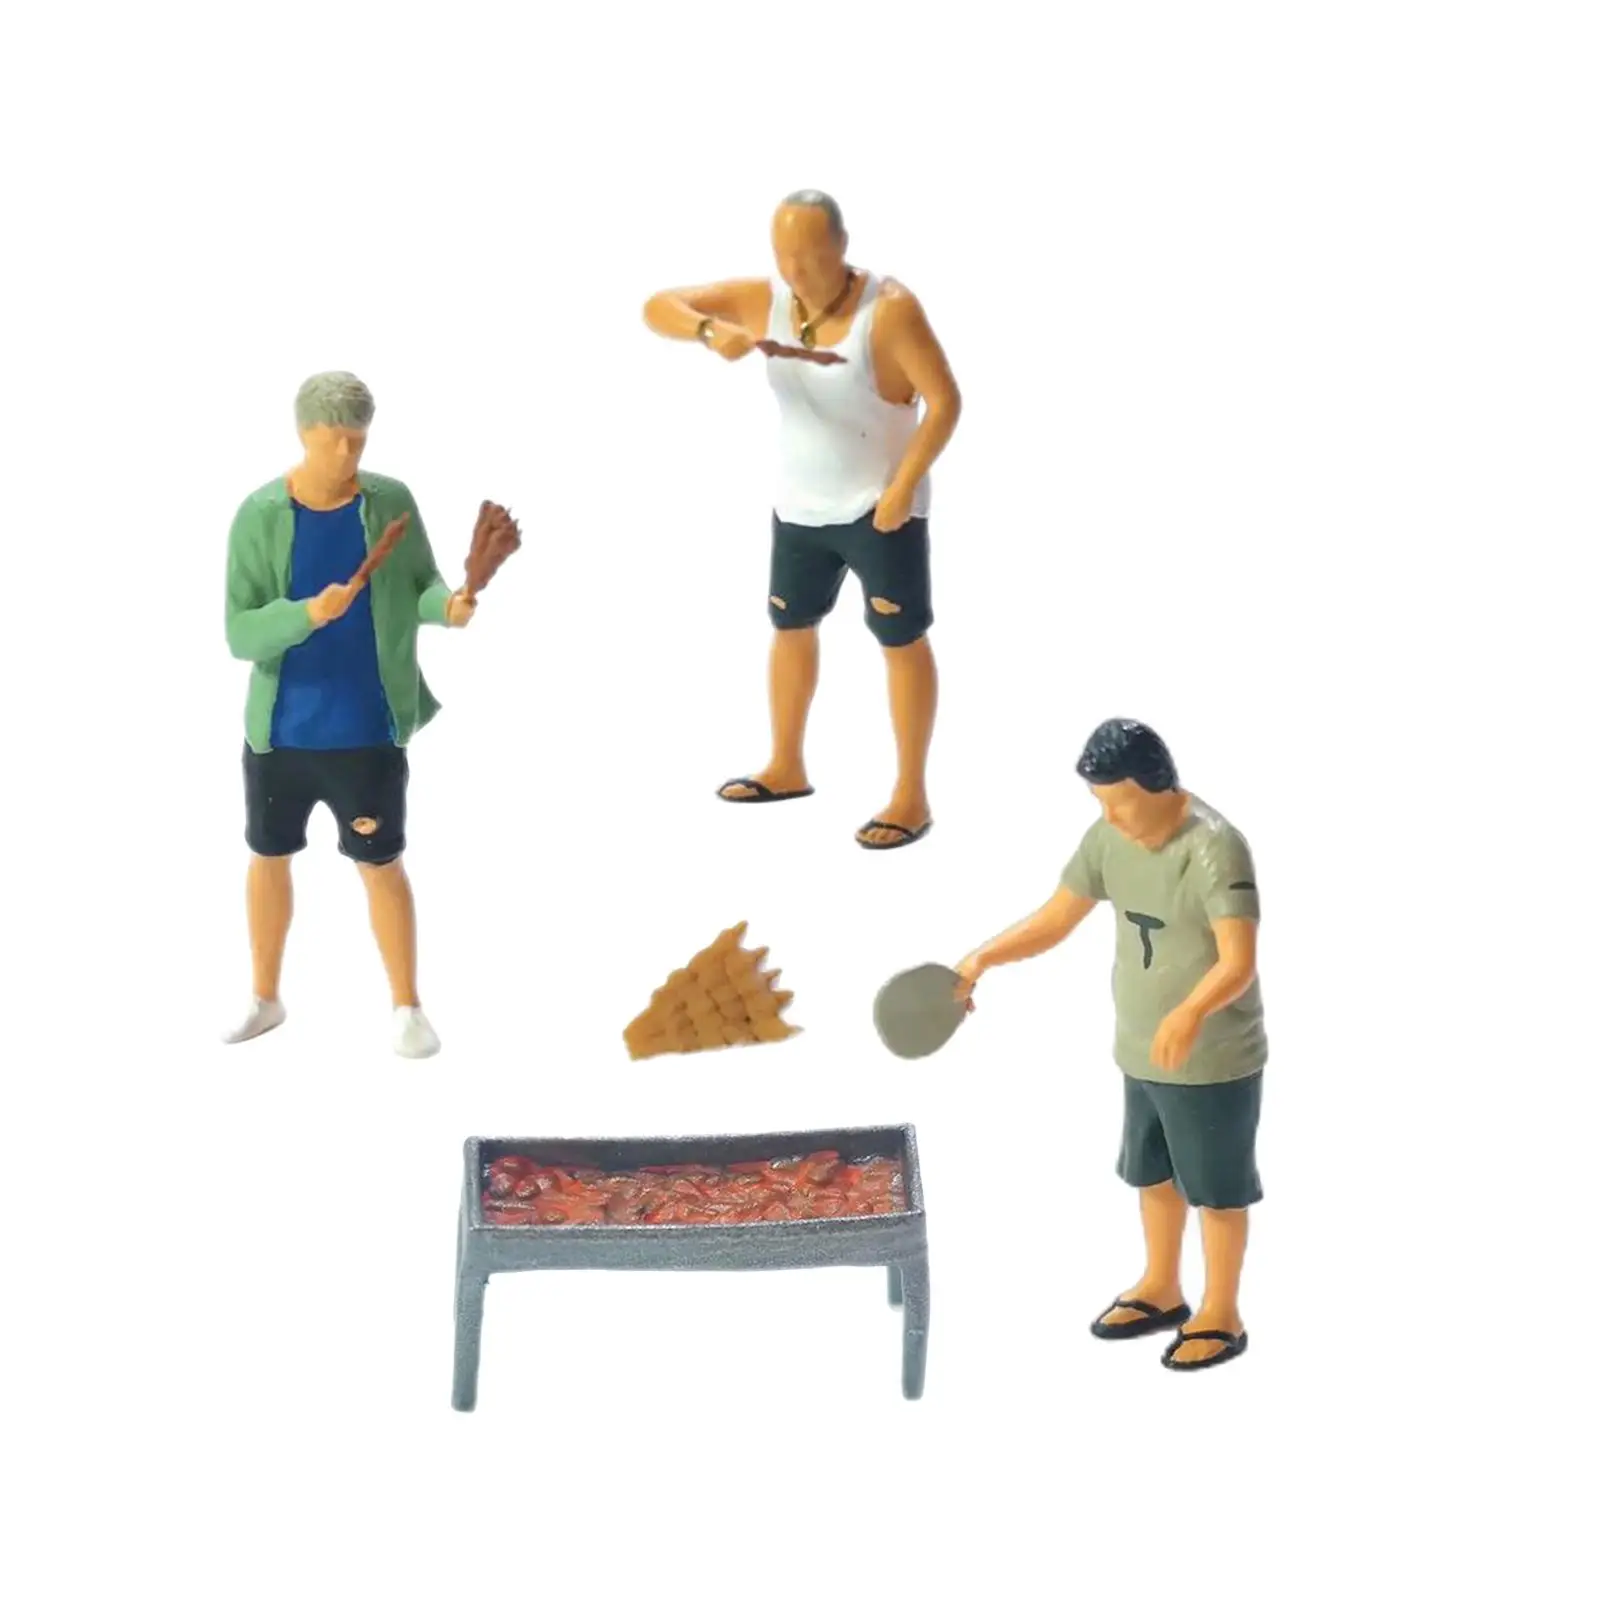 5 Pieces 1:64 Scale Tiny BBQ People S Gauge Micro Landscape Sand Table Layout Decoration Miniature Resin Figurines Decor